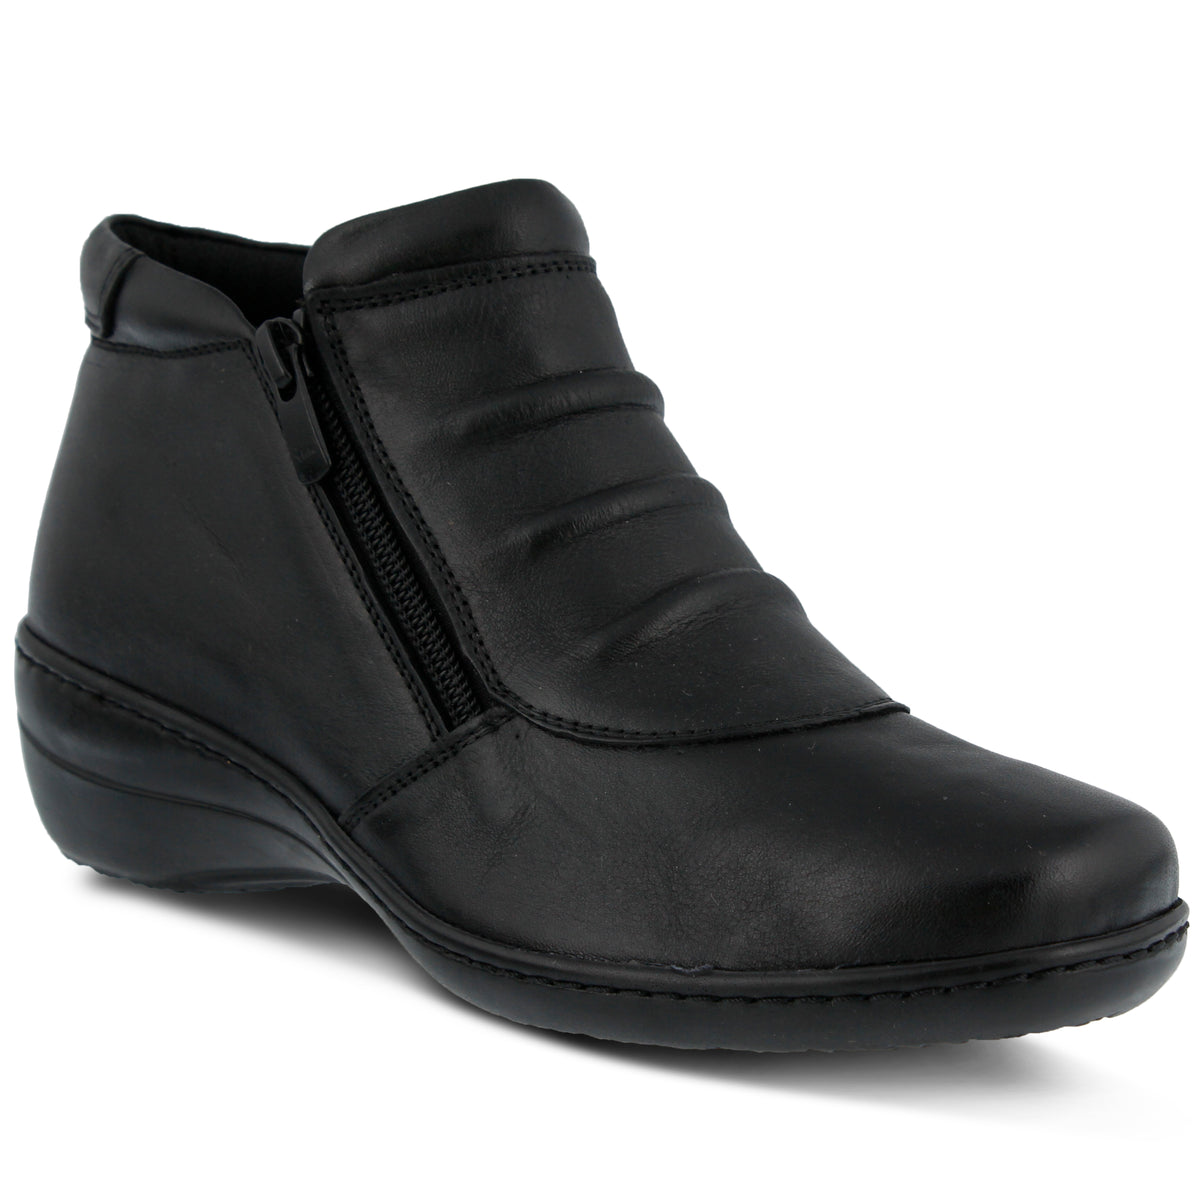 BLACK BRIONY BOOTIE by SPRING STEP – Spring Step Shoes